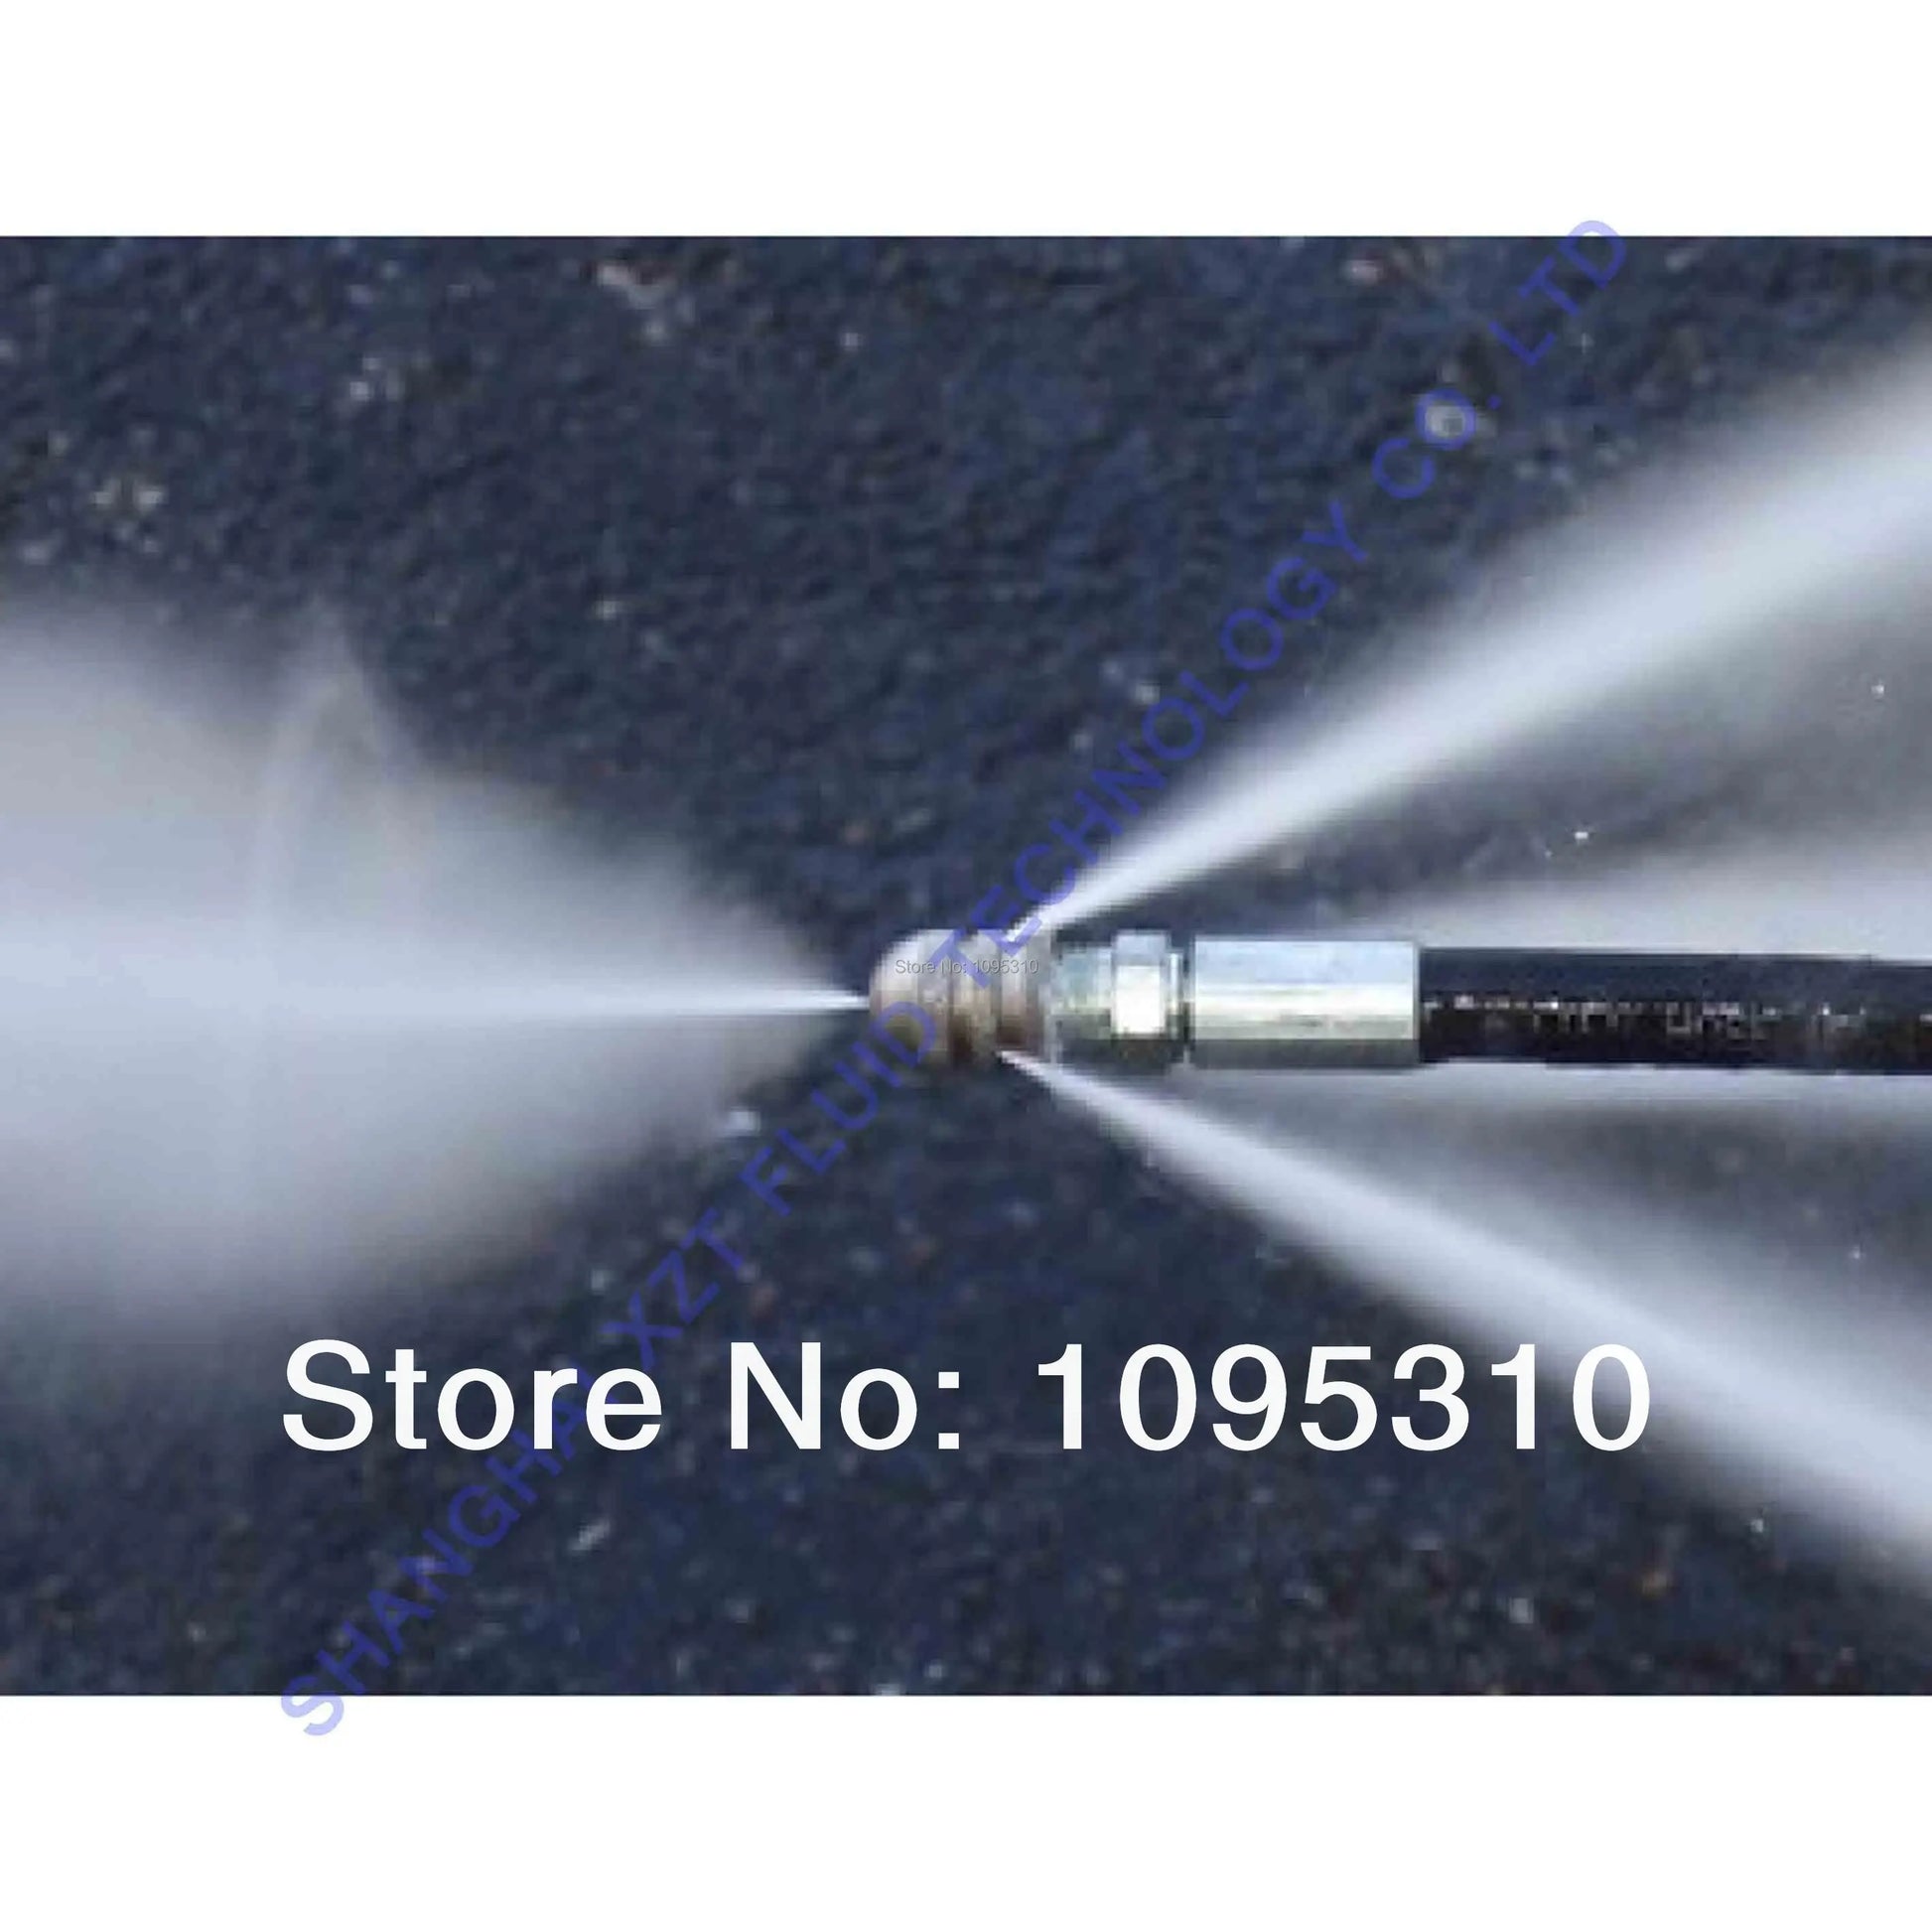 XZT-S13  1/4 Quick Plug 50'/15m 200BAR/3000PSI Sewer Jetter cleaning hose,Sewer  Drain Cleaning hose,  Home & Garden > Lawn & Garden > Outdoor Power Equipment Accessories > Pressure Washer Accessories 122.99 EZYSELLA SHOP